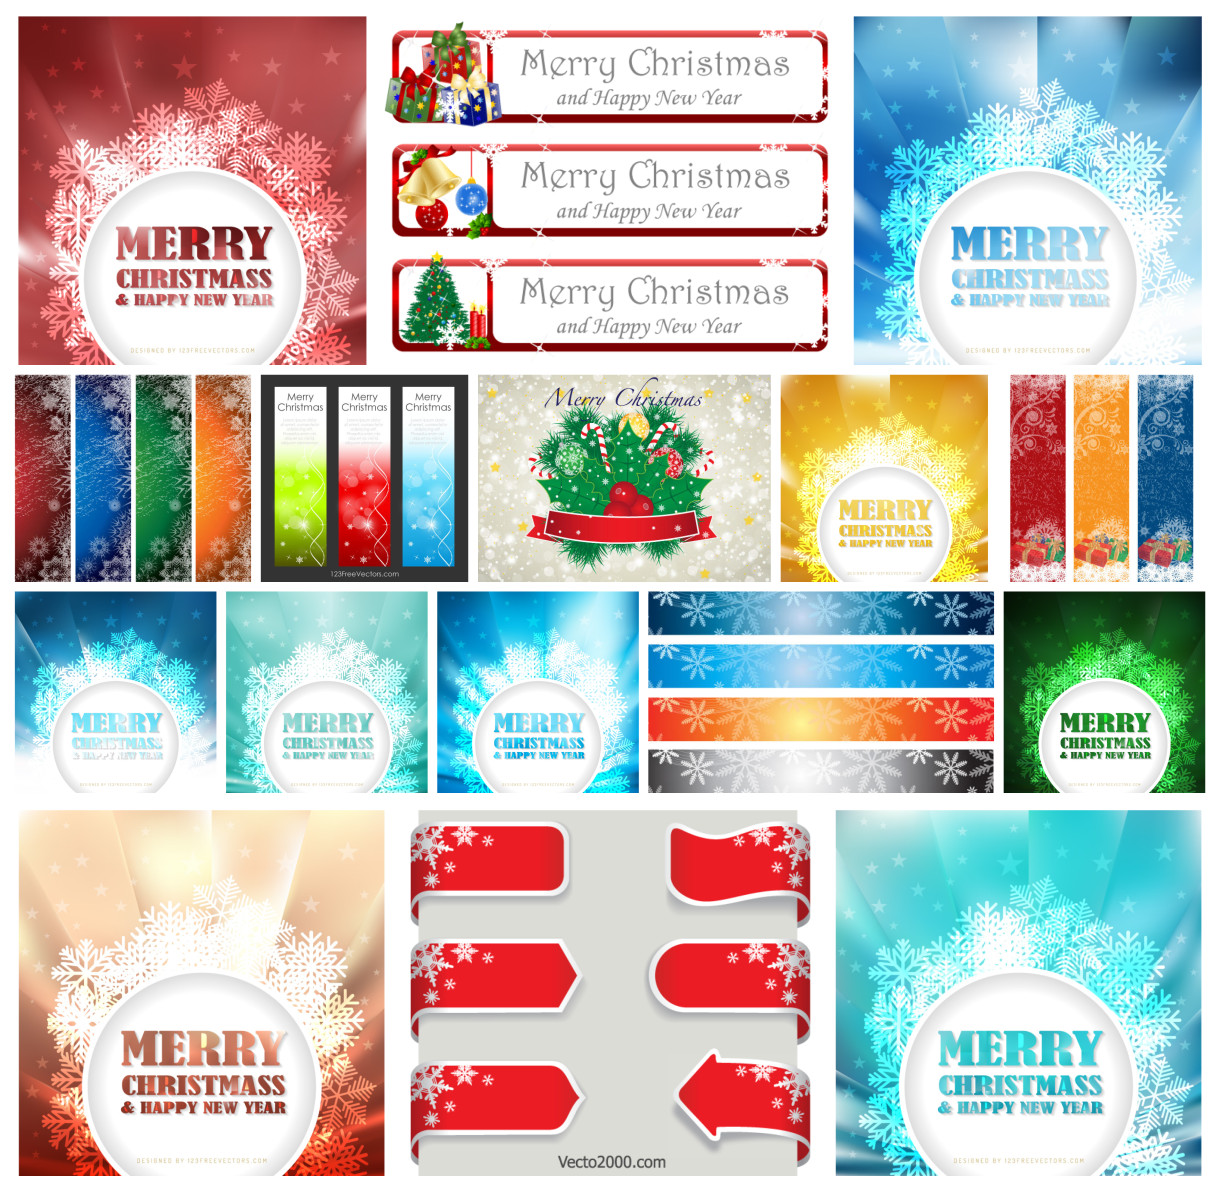 Get in the Festive Spirit with Our Stunning Collection of 18 Christmas Banners and Decorations